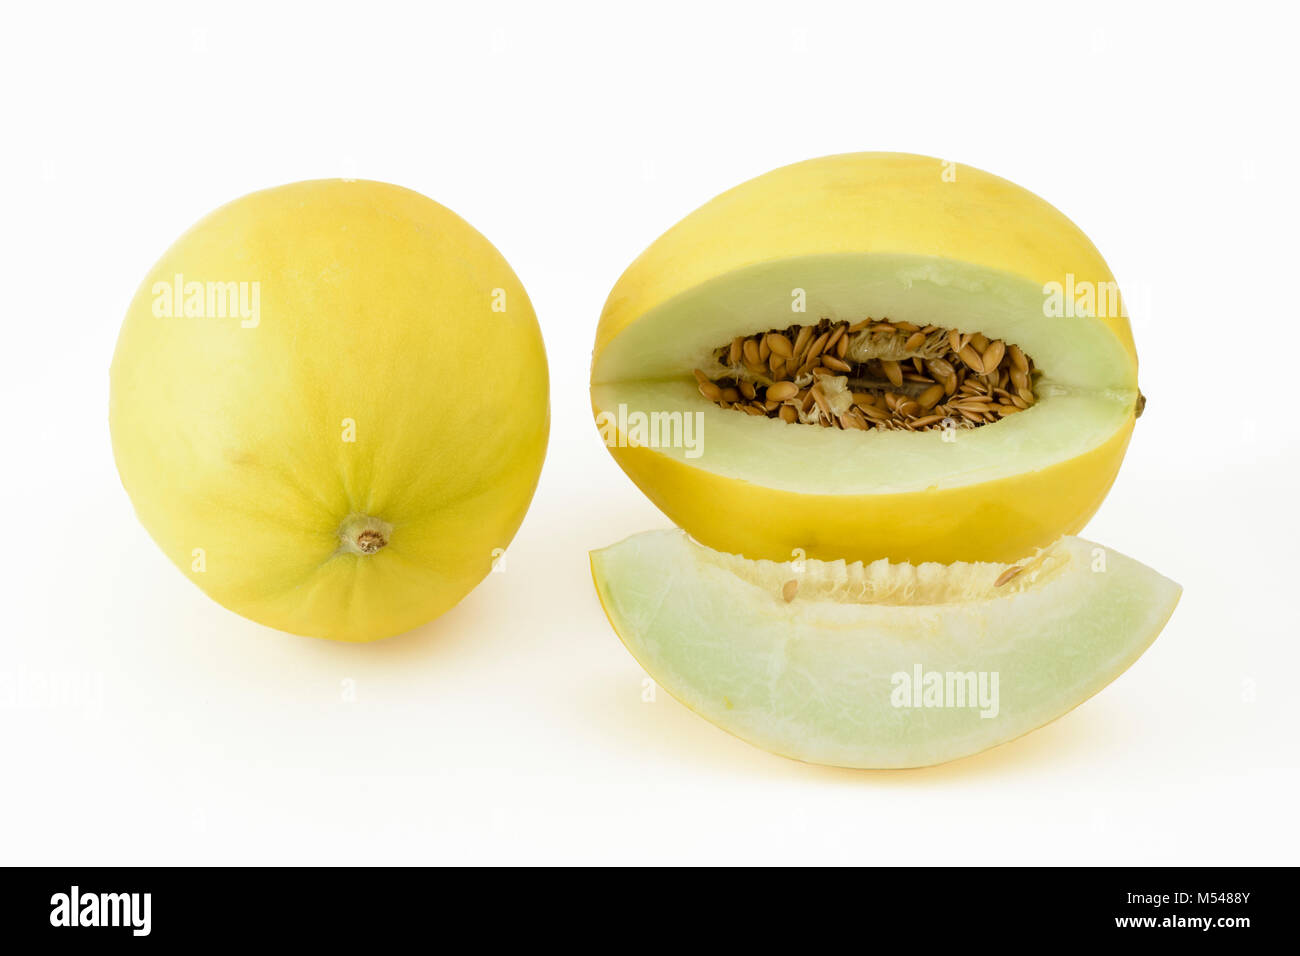 Sliced and whole golden honeydew melon on a white background Stock Photo